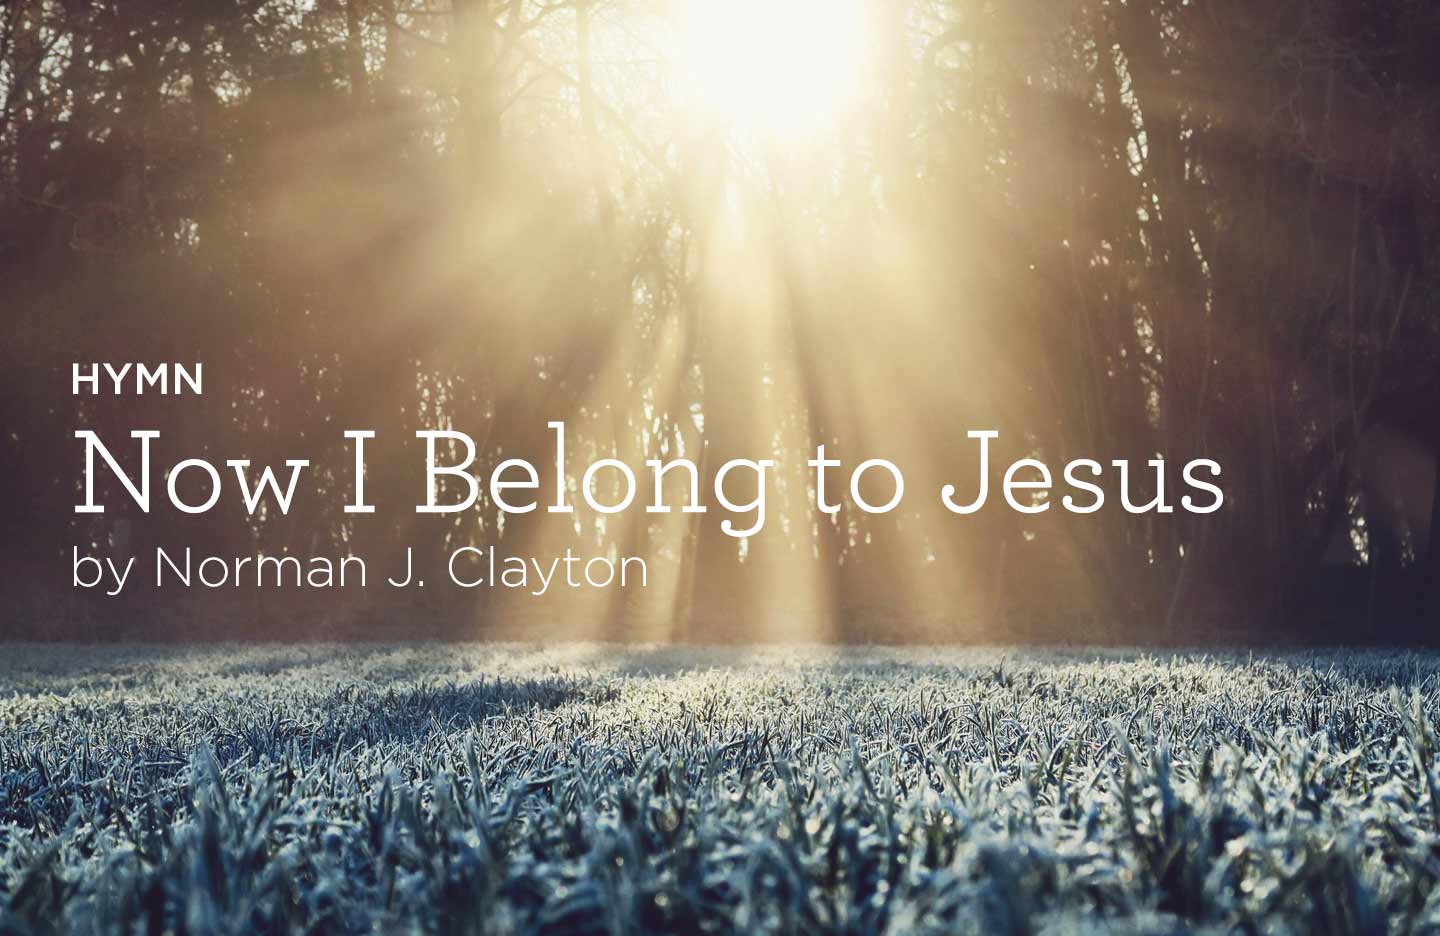 thumbnail image for Hymn: “Now I Belong to Jesus” by Norman J. Clayton